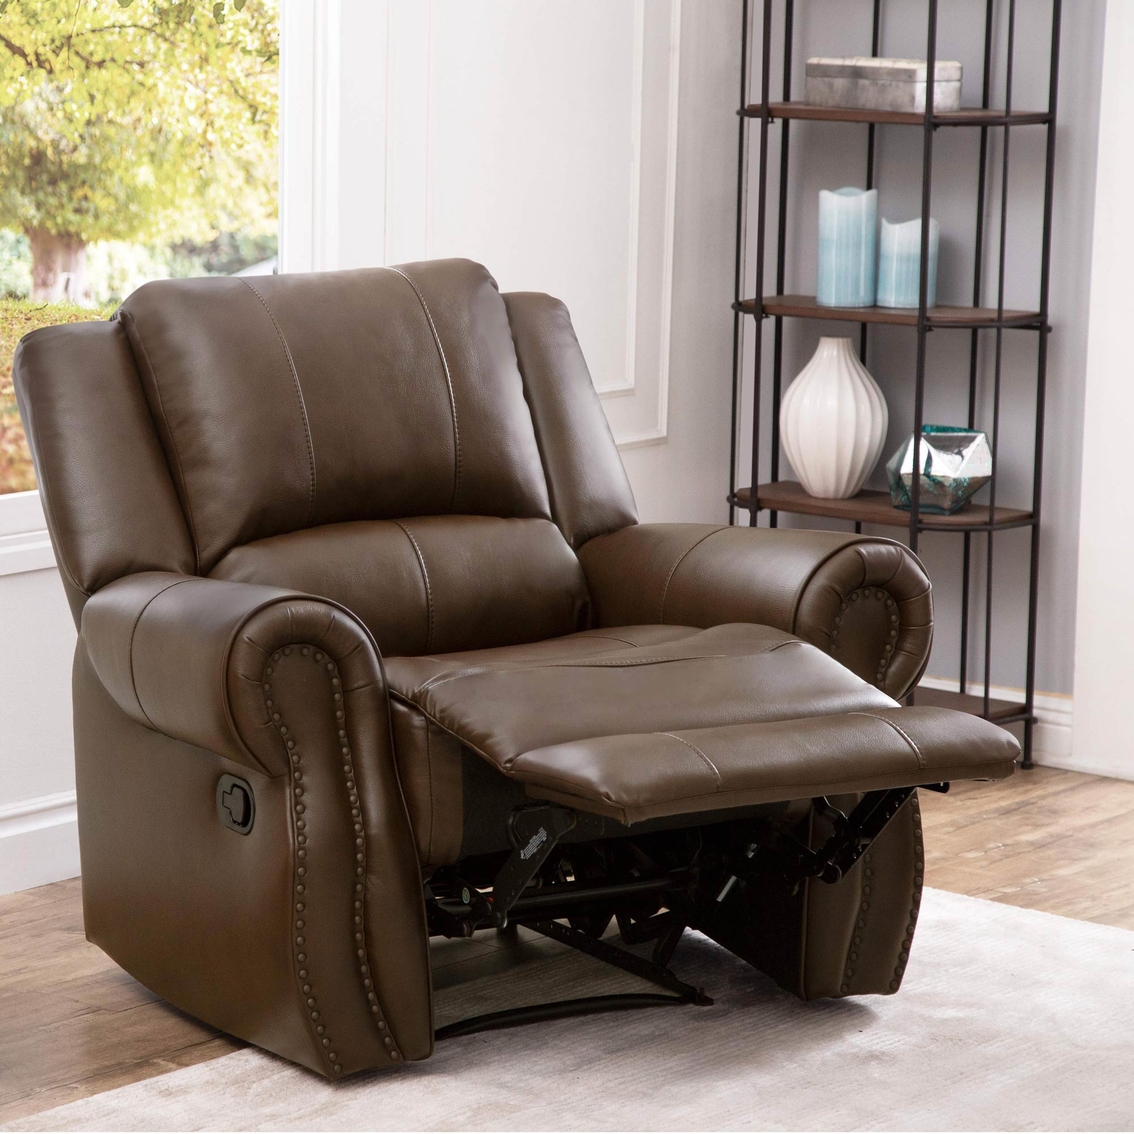 Abbyson Living Calabasas Leather Reclining, 3 pc. Set - Image 4 of 9